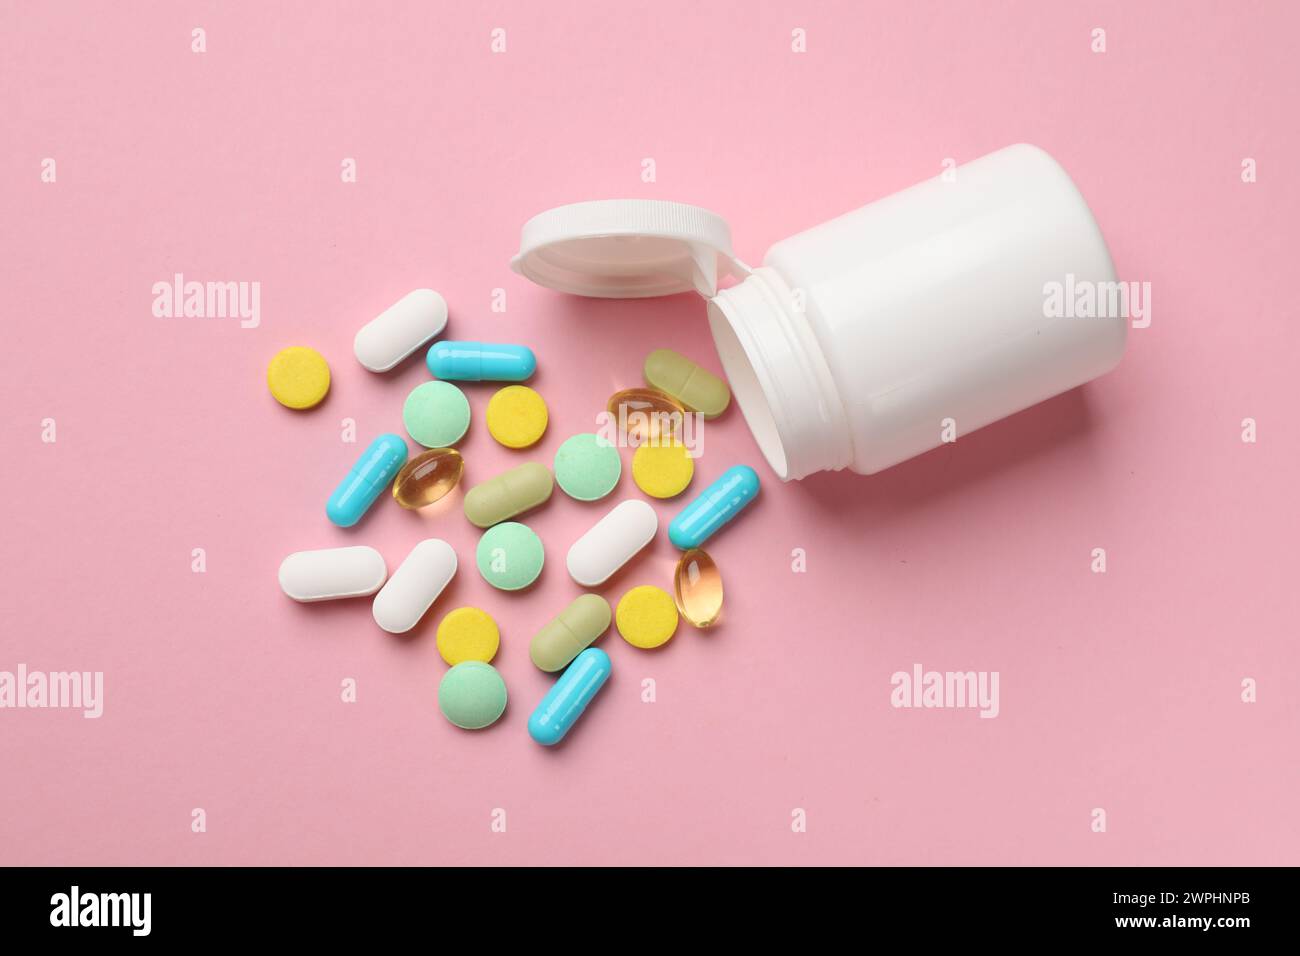 White bottle and different vitamin pills on pink background, top view Stock Photo